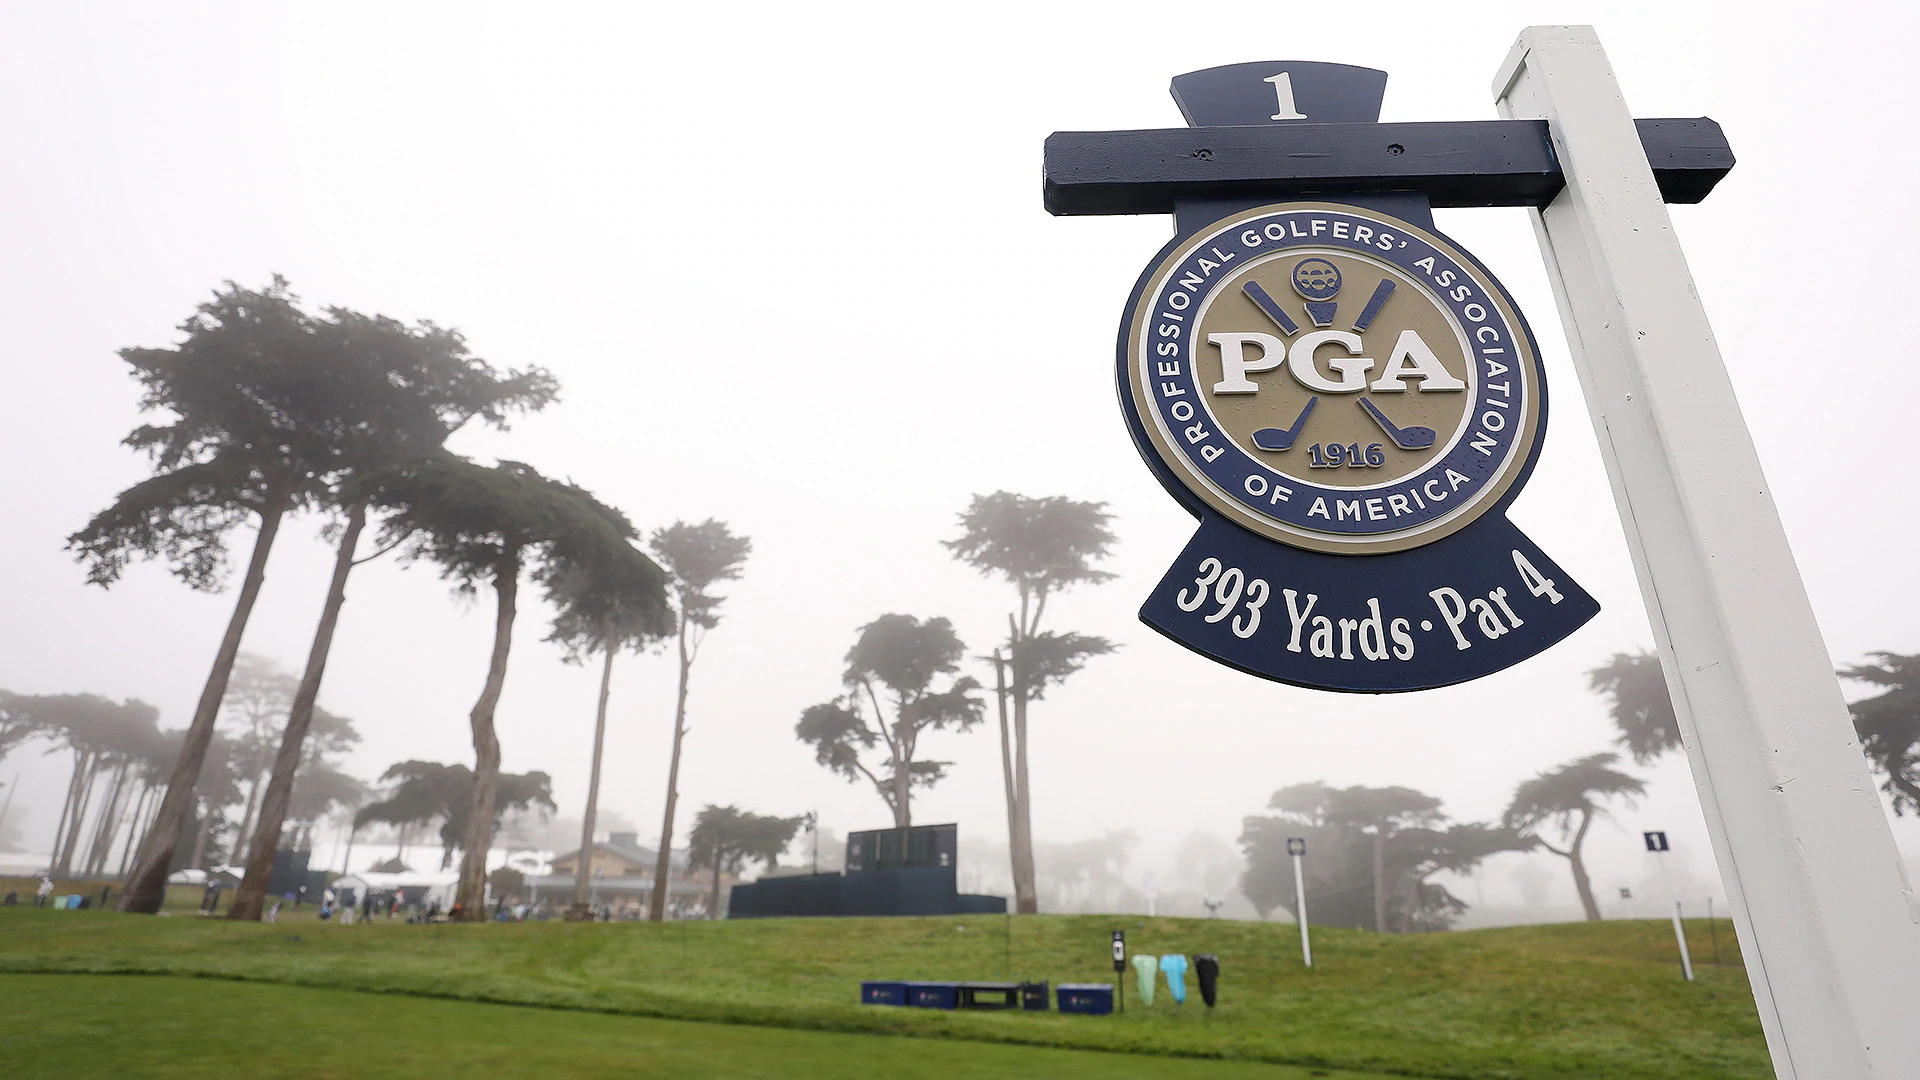 Round 1 and Round 2 tee times for the PGA Championship